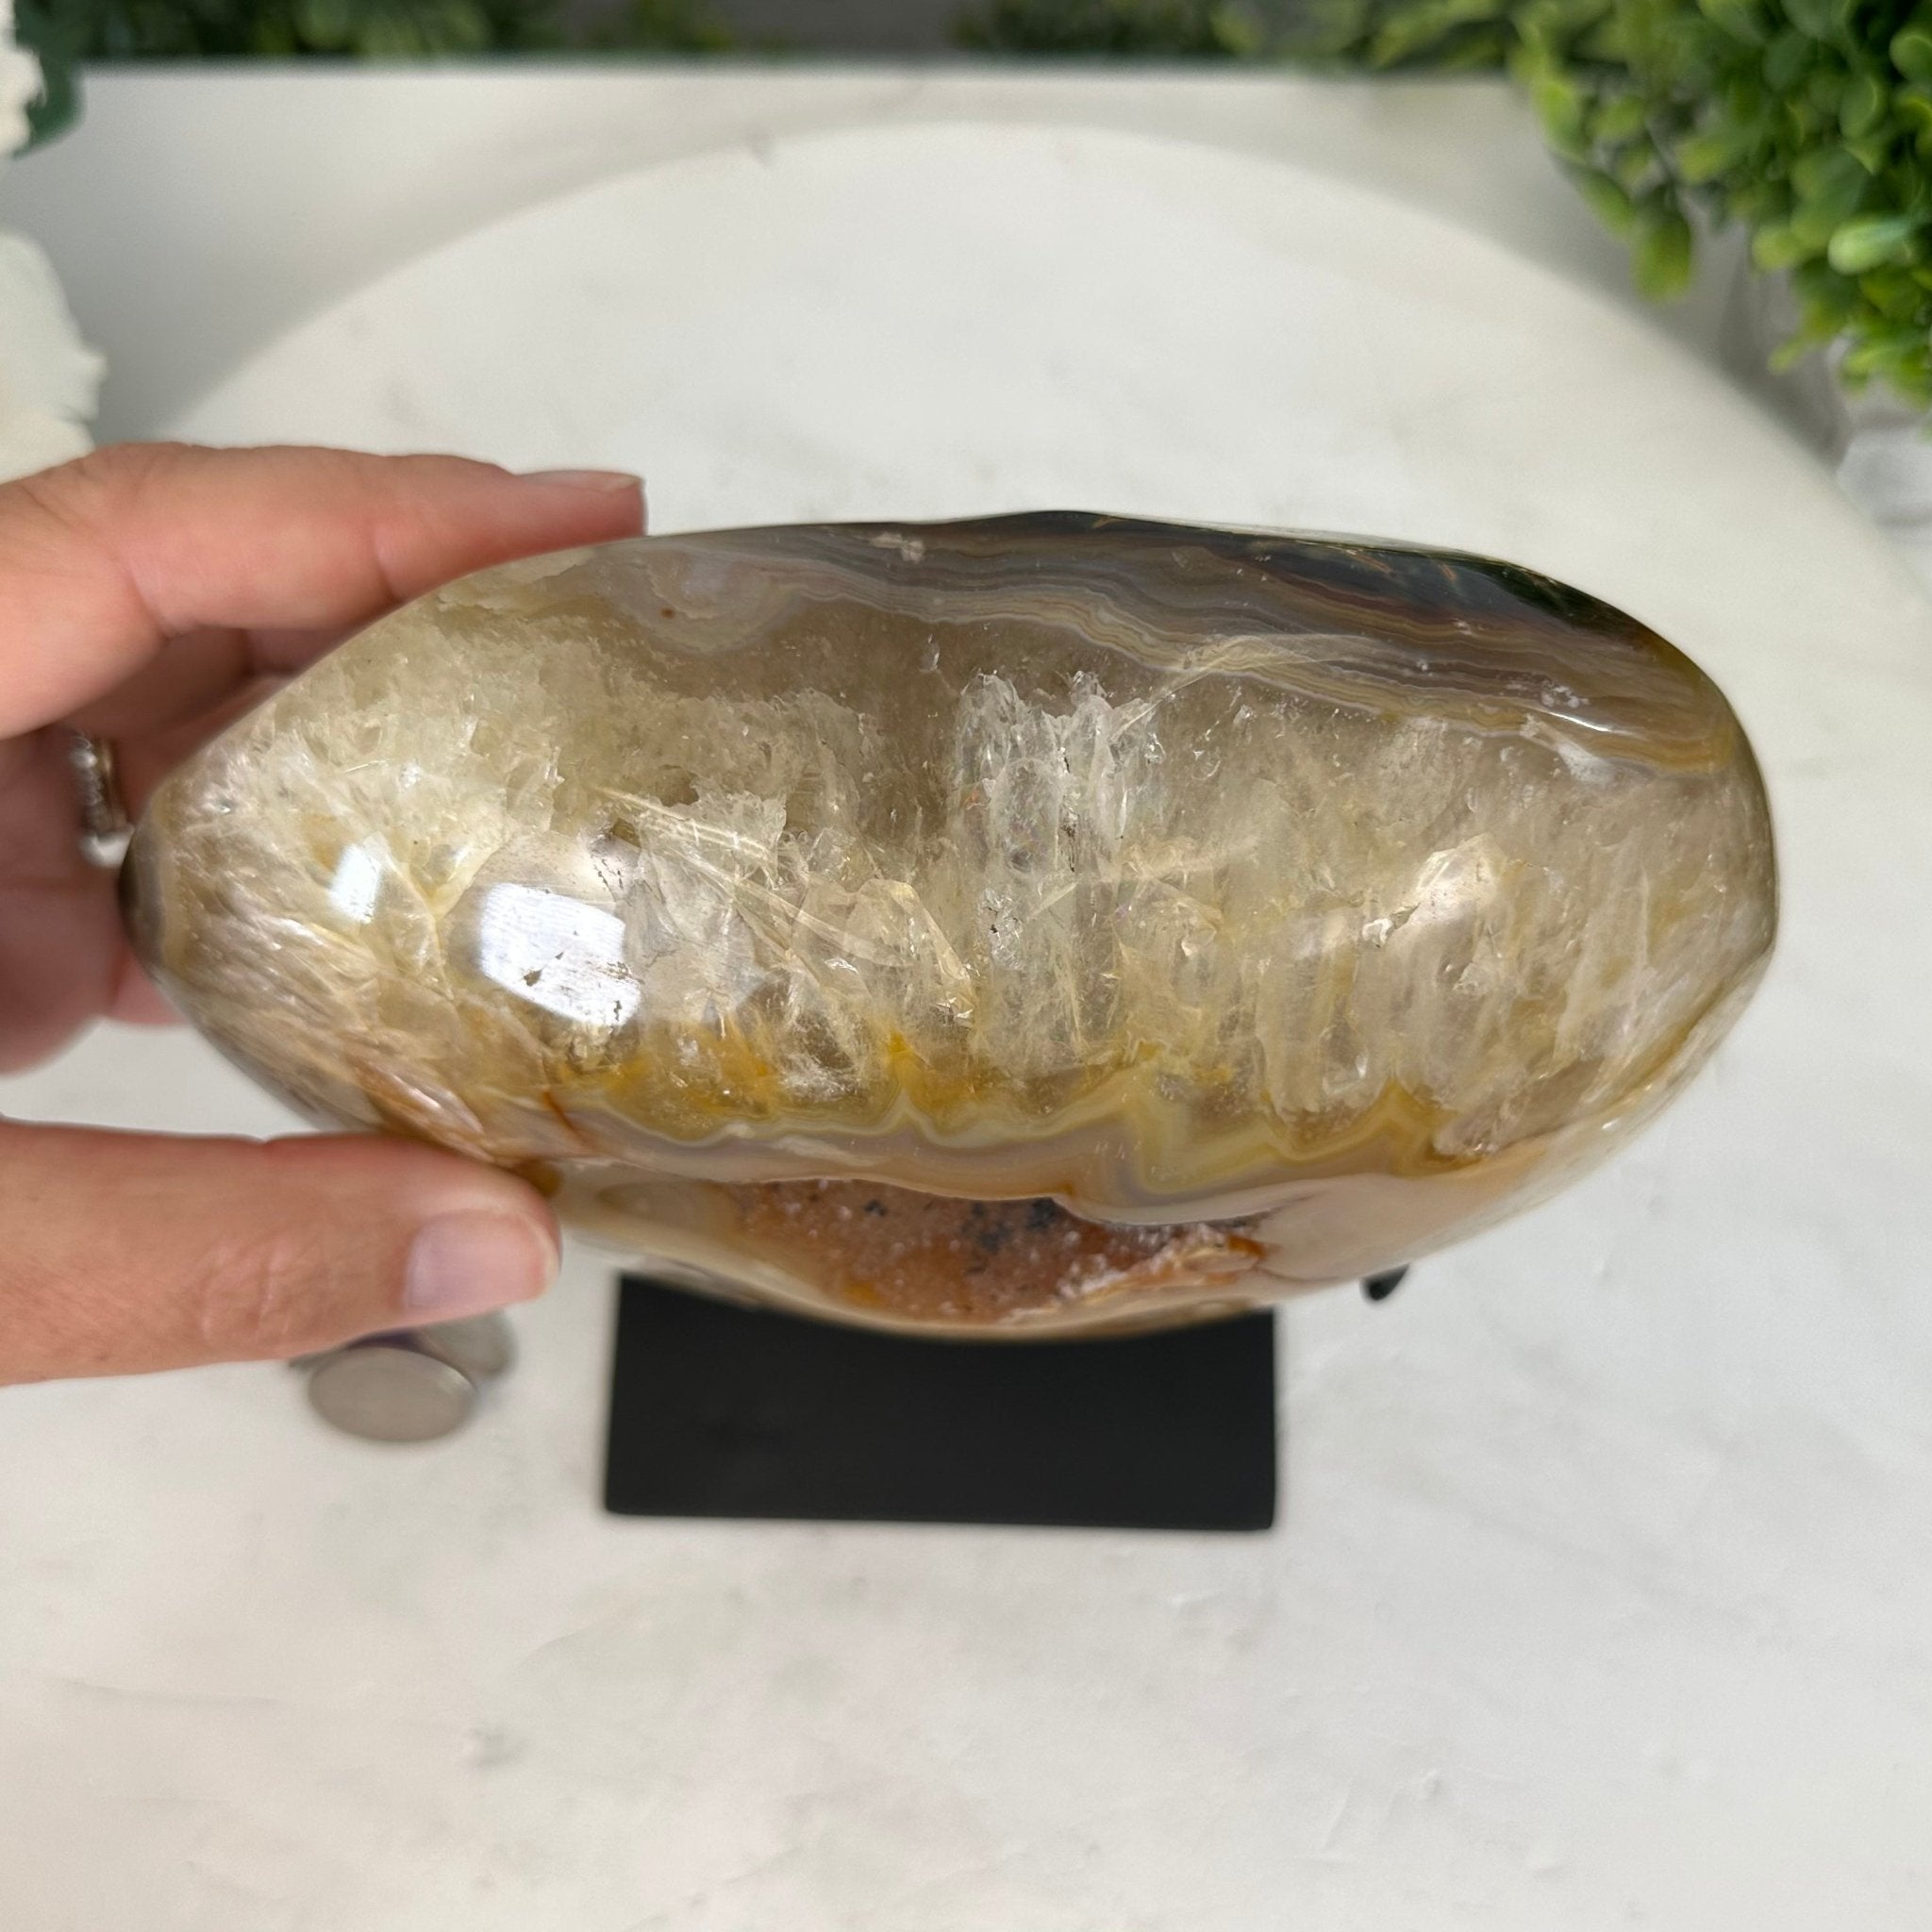 Polished Agate Heart-Shaped Geode on a Metal Stand, 4.7 lbs & 6.8" Tall, Model #5468-0013 by Brazil Gems - Brazil GemsBrazil GemsPolished Agate Heart-Shaped Geode on a Metal Stand, 4.7 lbs & 6.8" Tall, Model #5468-0013 by Brazil GemsHearts5468-0013